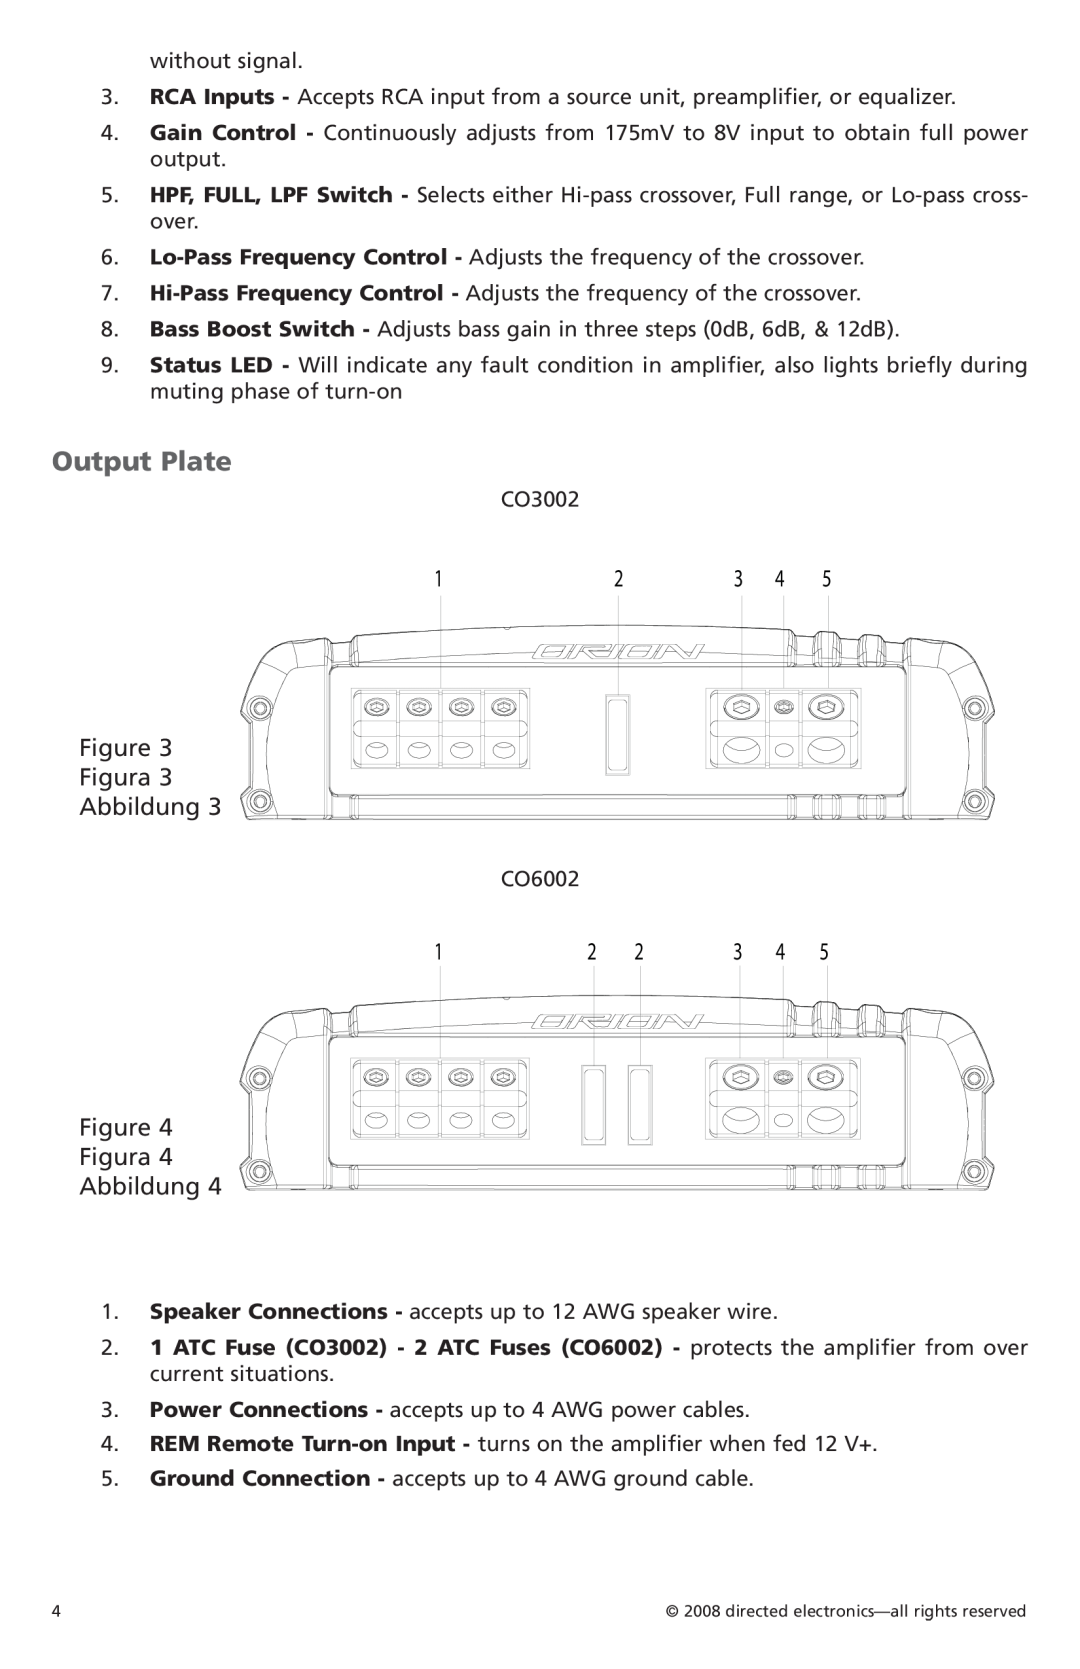 Orion Car Audio CO3002, CO6002 owner manual Output Plate, Figure Figura Abbildung Figure Figura Abbildung 